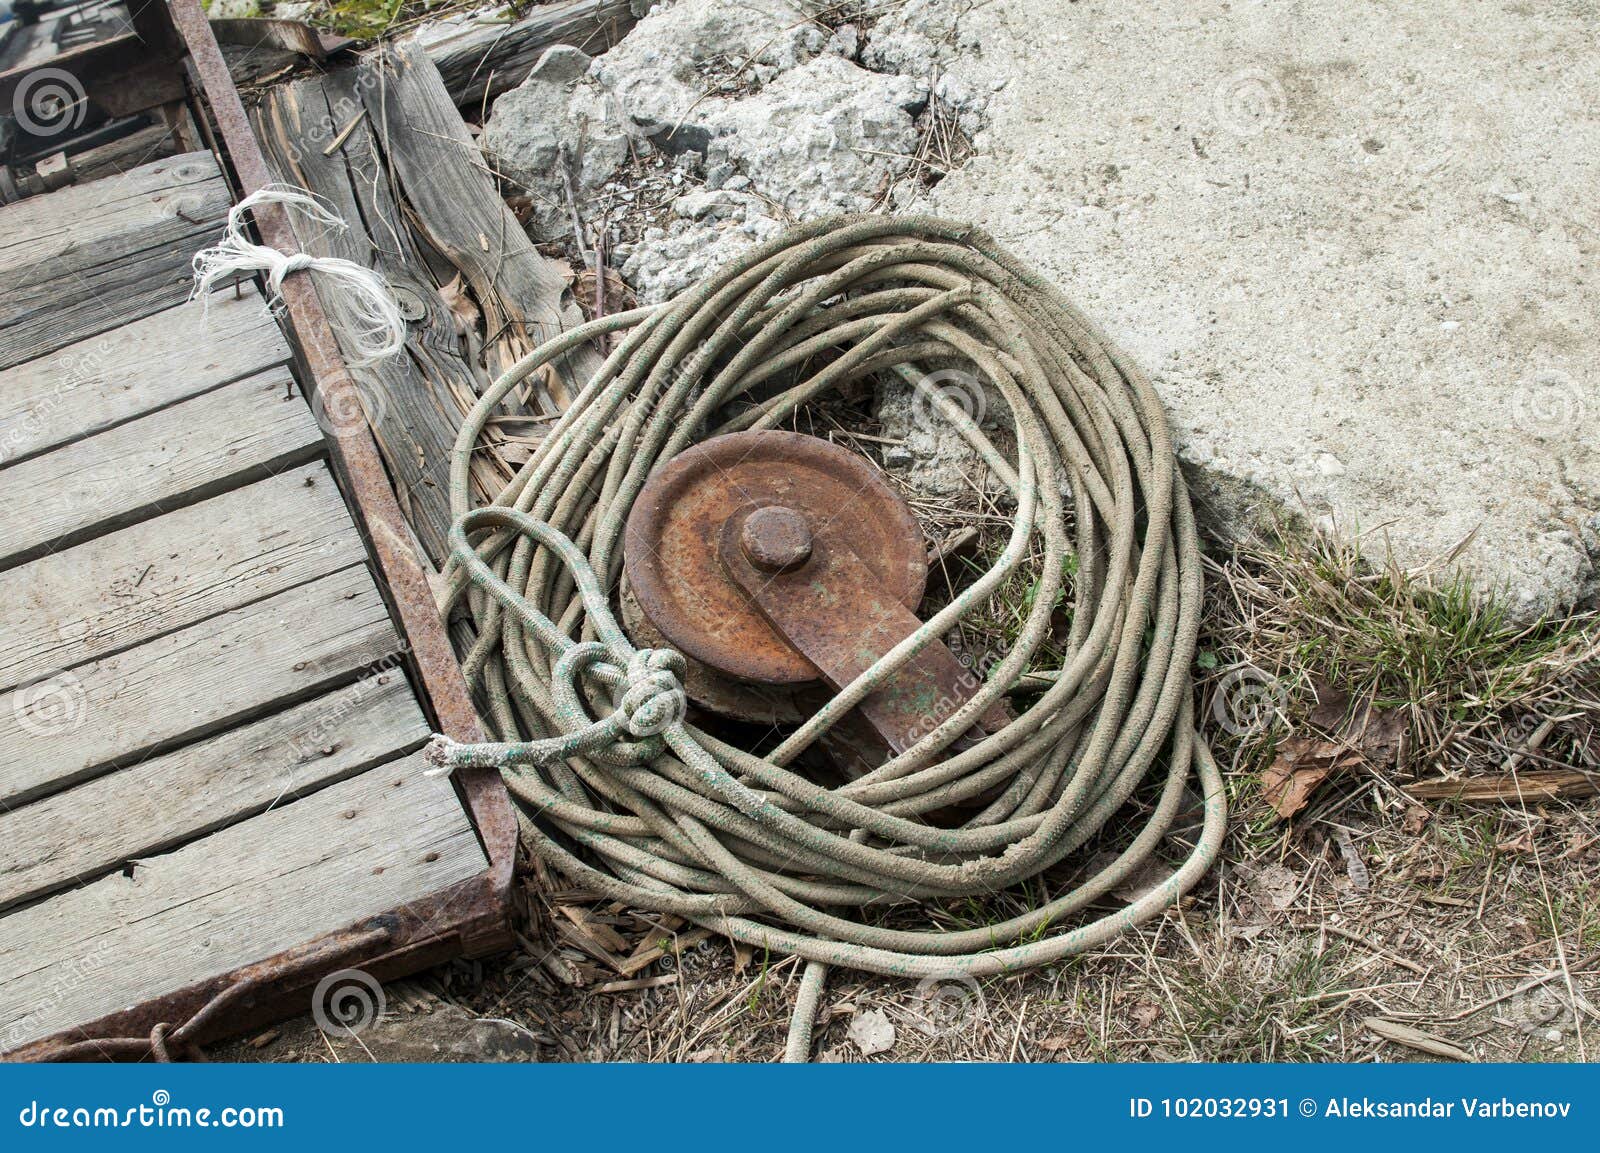 Rusty Reel And Weathered Rope Stock Image - Image of poor ... - 1300 x 954 jpeg 261kB